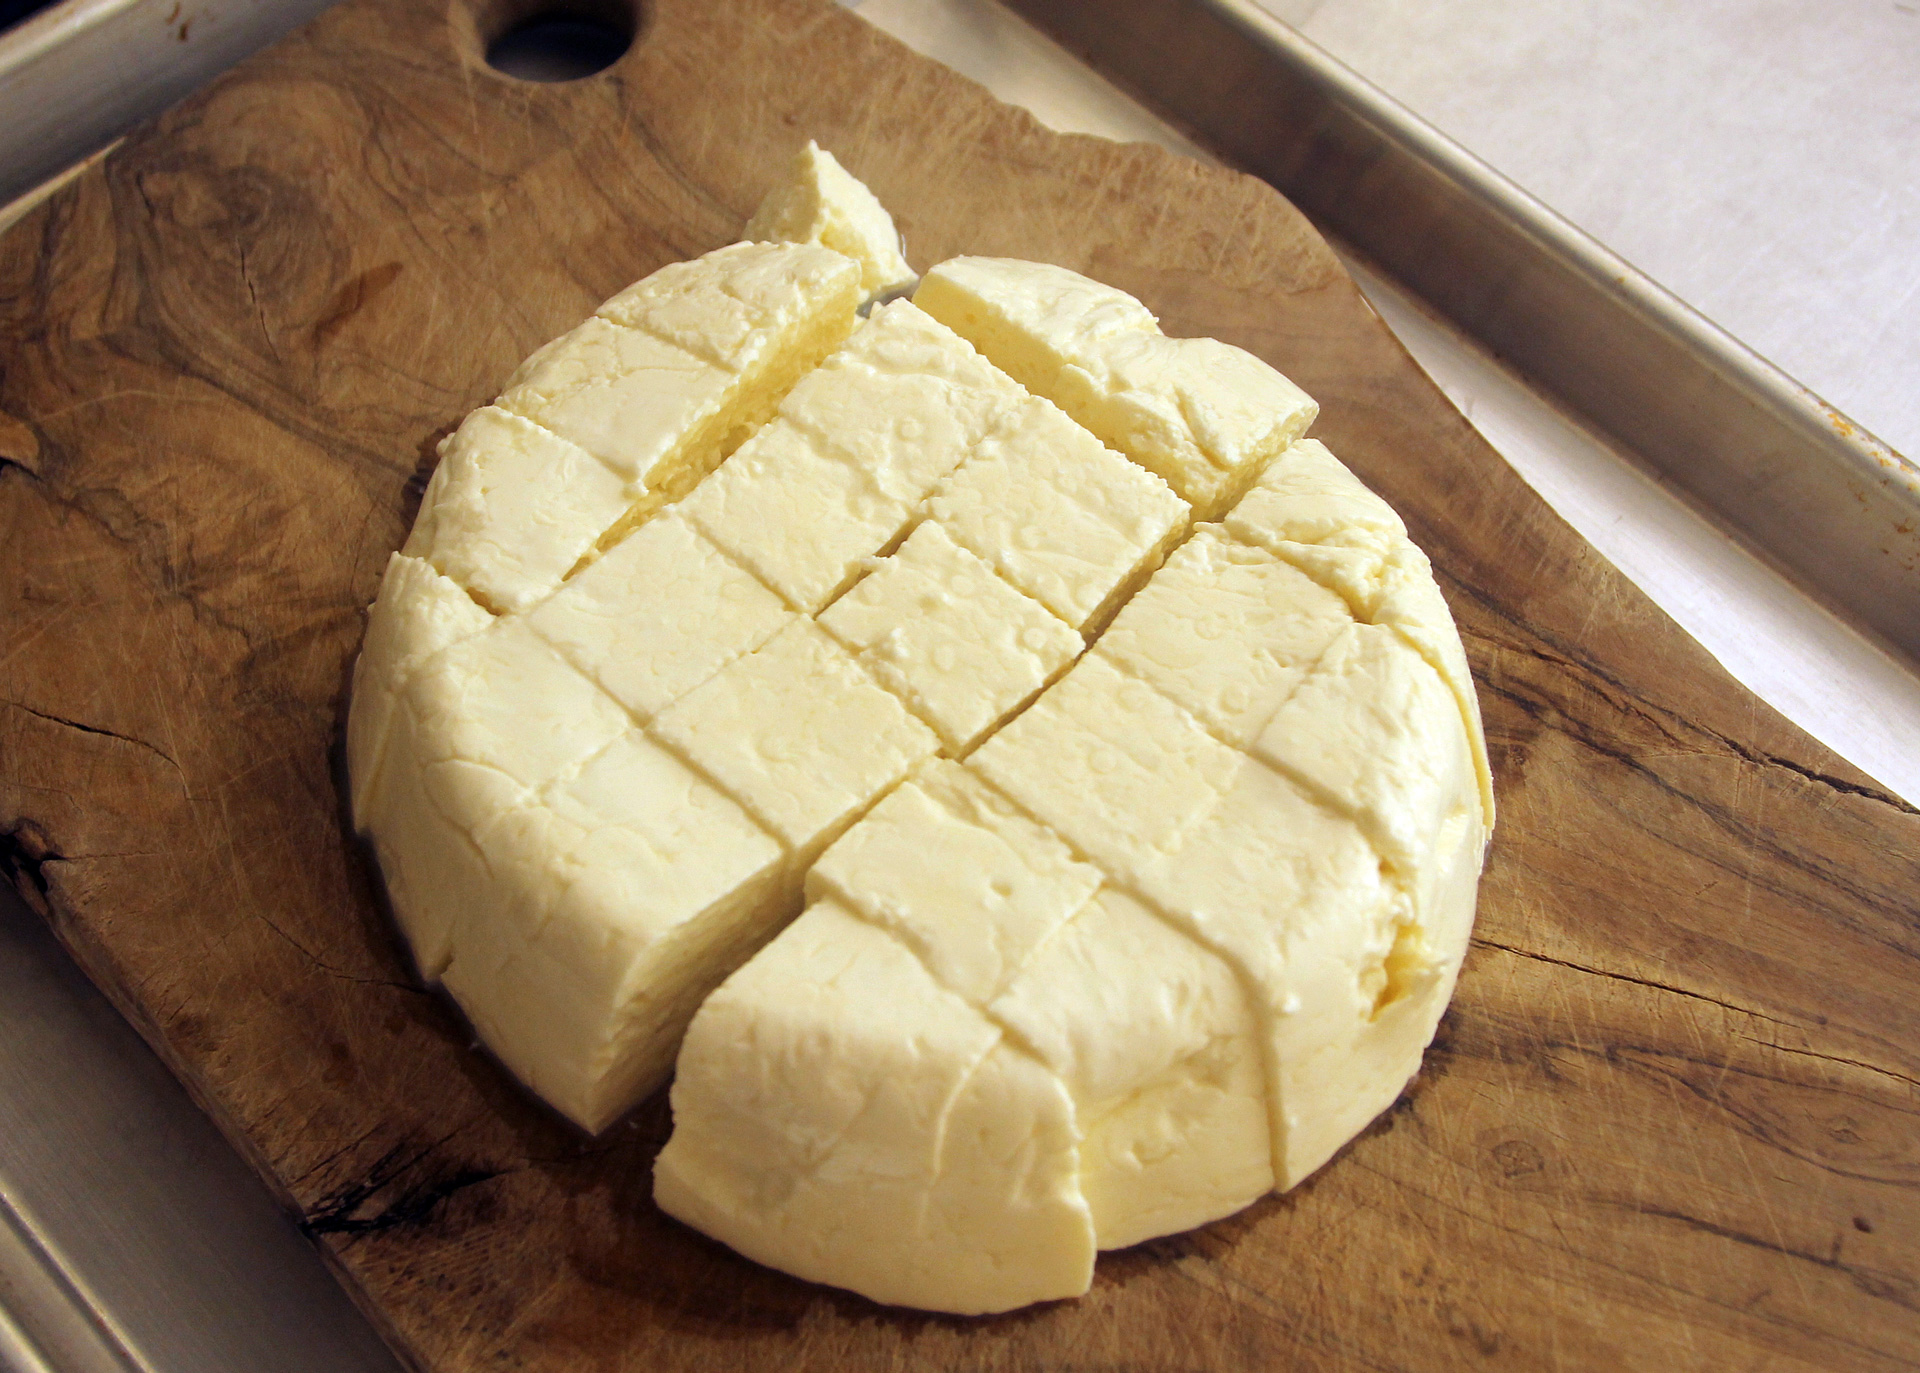 Cut the set curd into a grid of 1- to 1 ½-inch cubes.